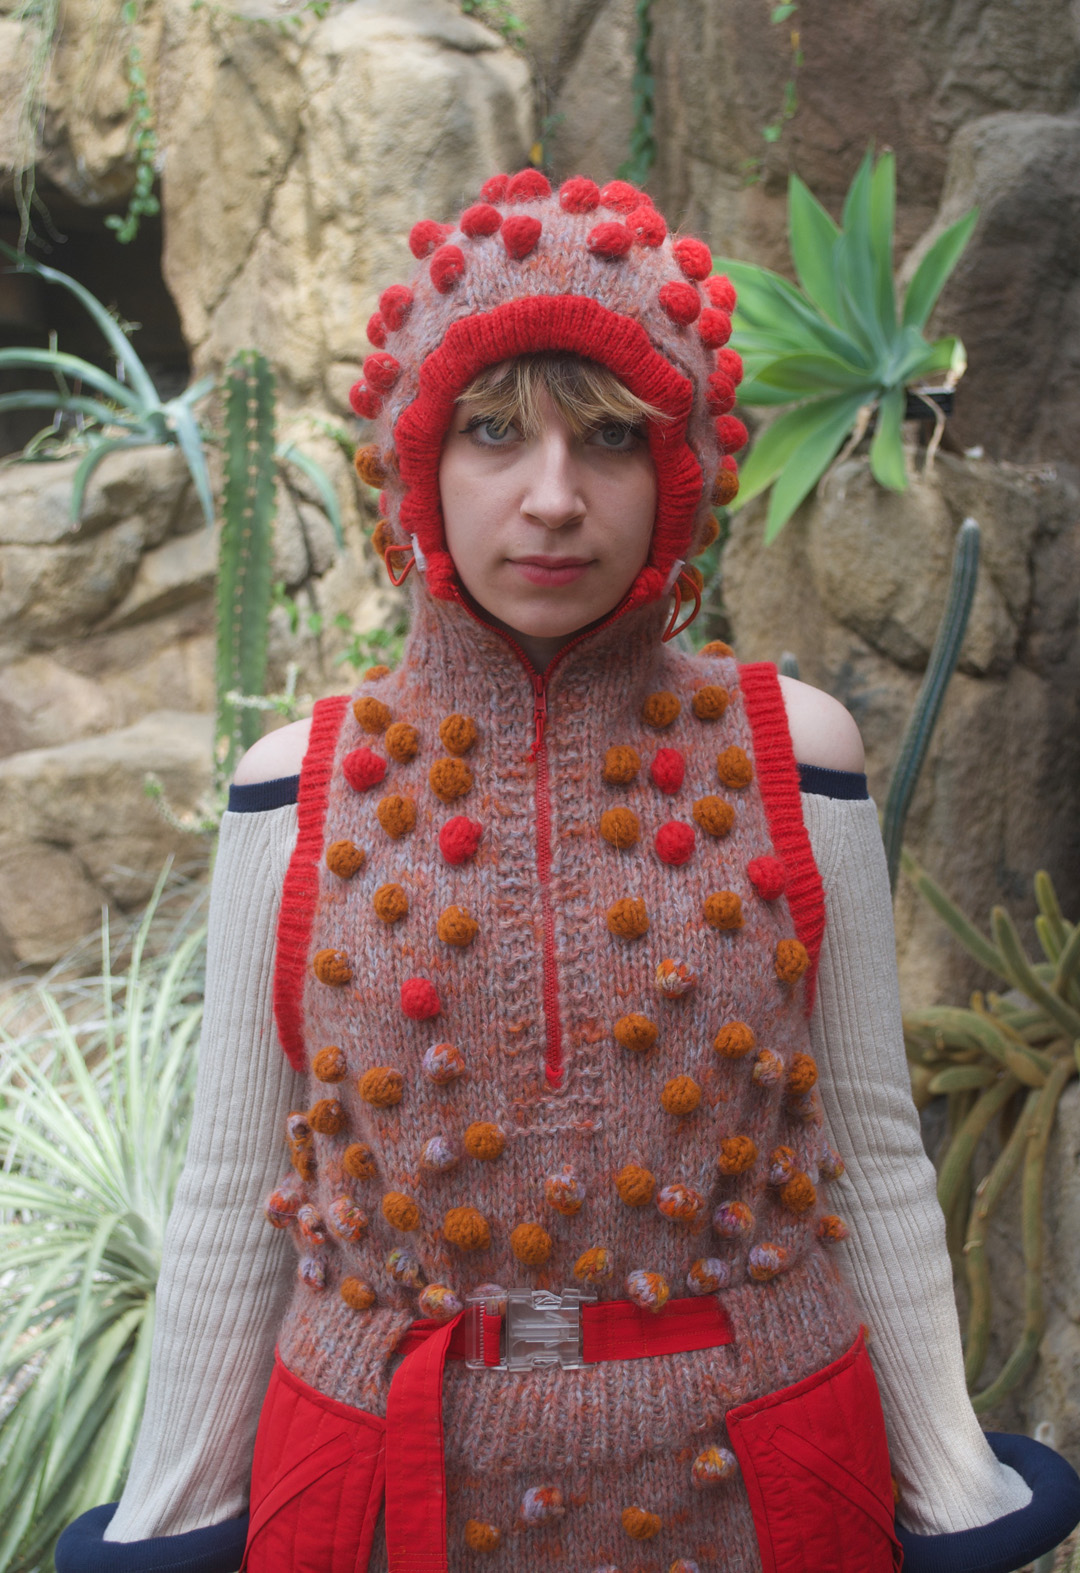 Cropped image of a woman wearing a hand-knit dress with bobbles, hood, and an off-the-shoulder knit top.